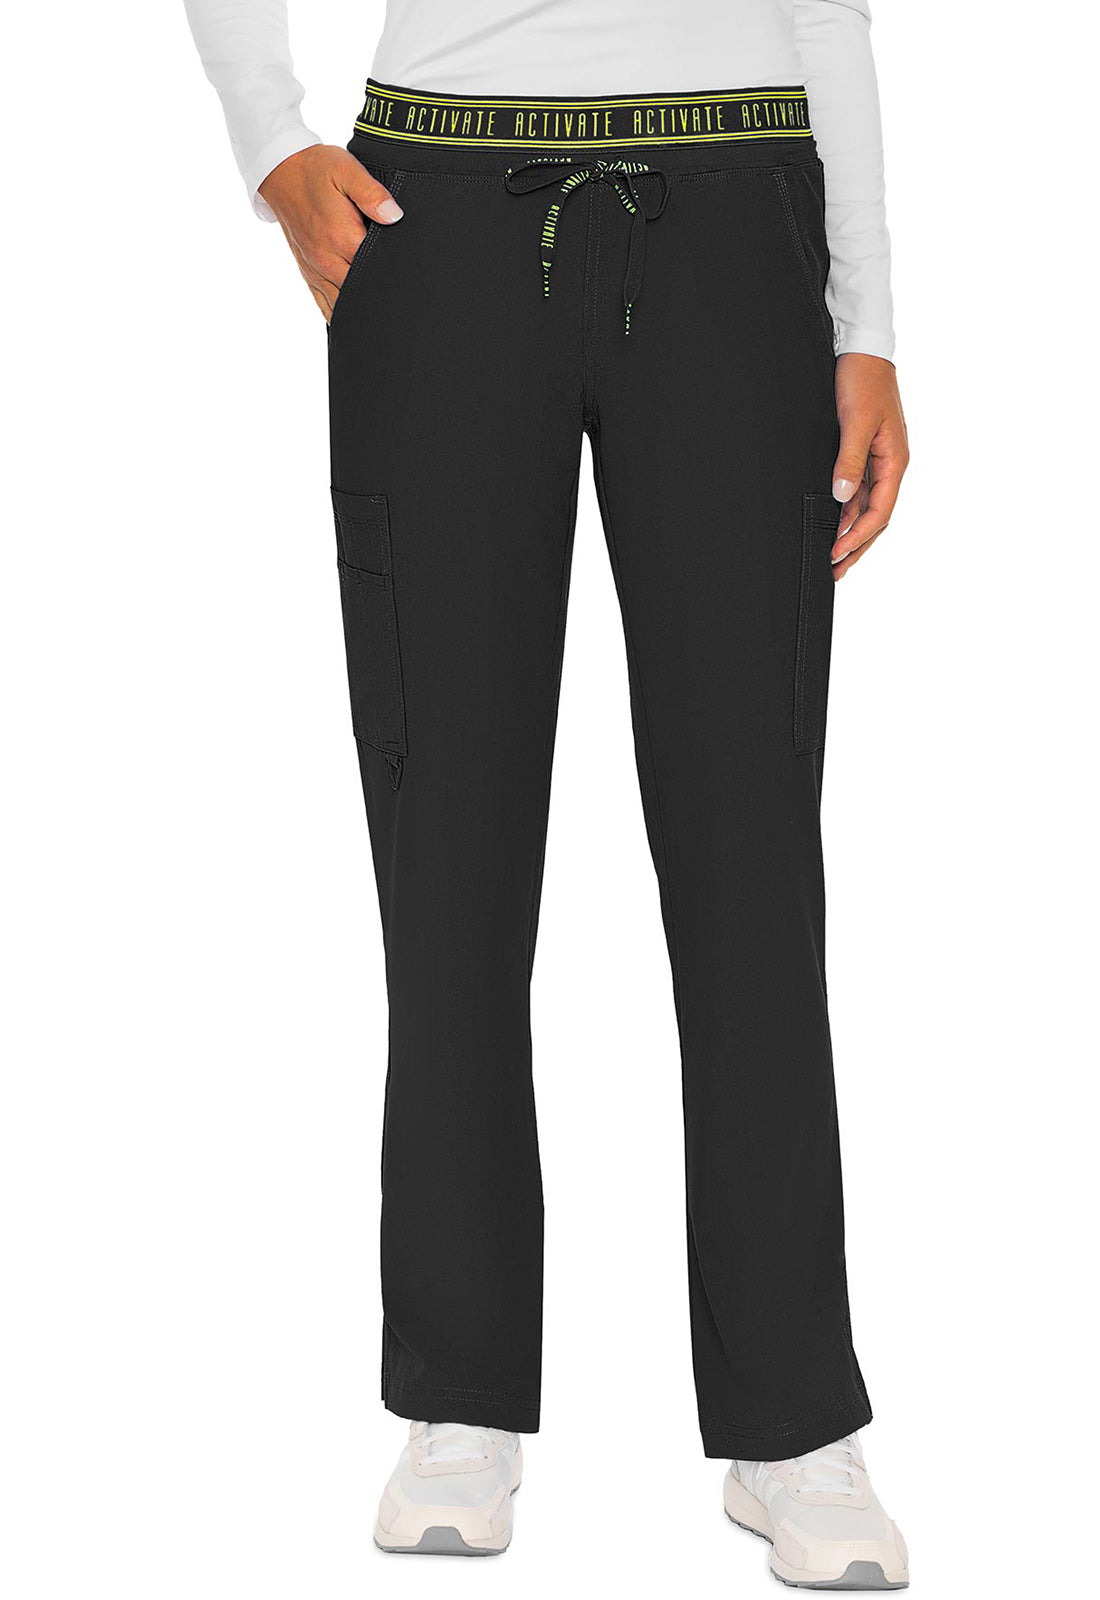 Clearance Med Couture Activate Yoga 2 Cargo Pocket Pants